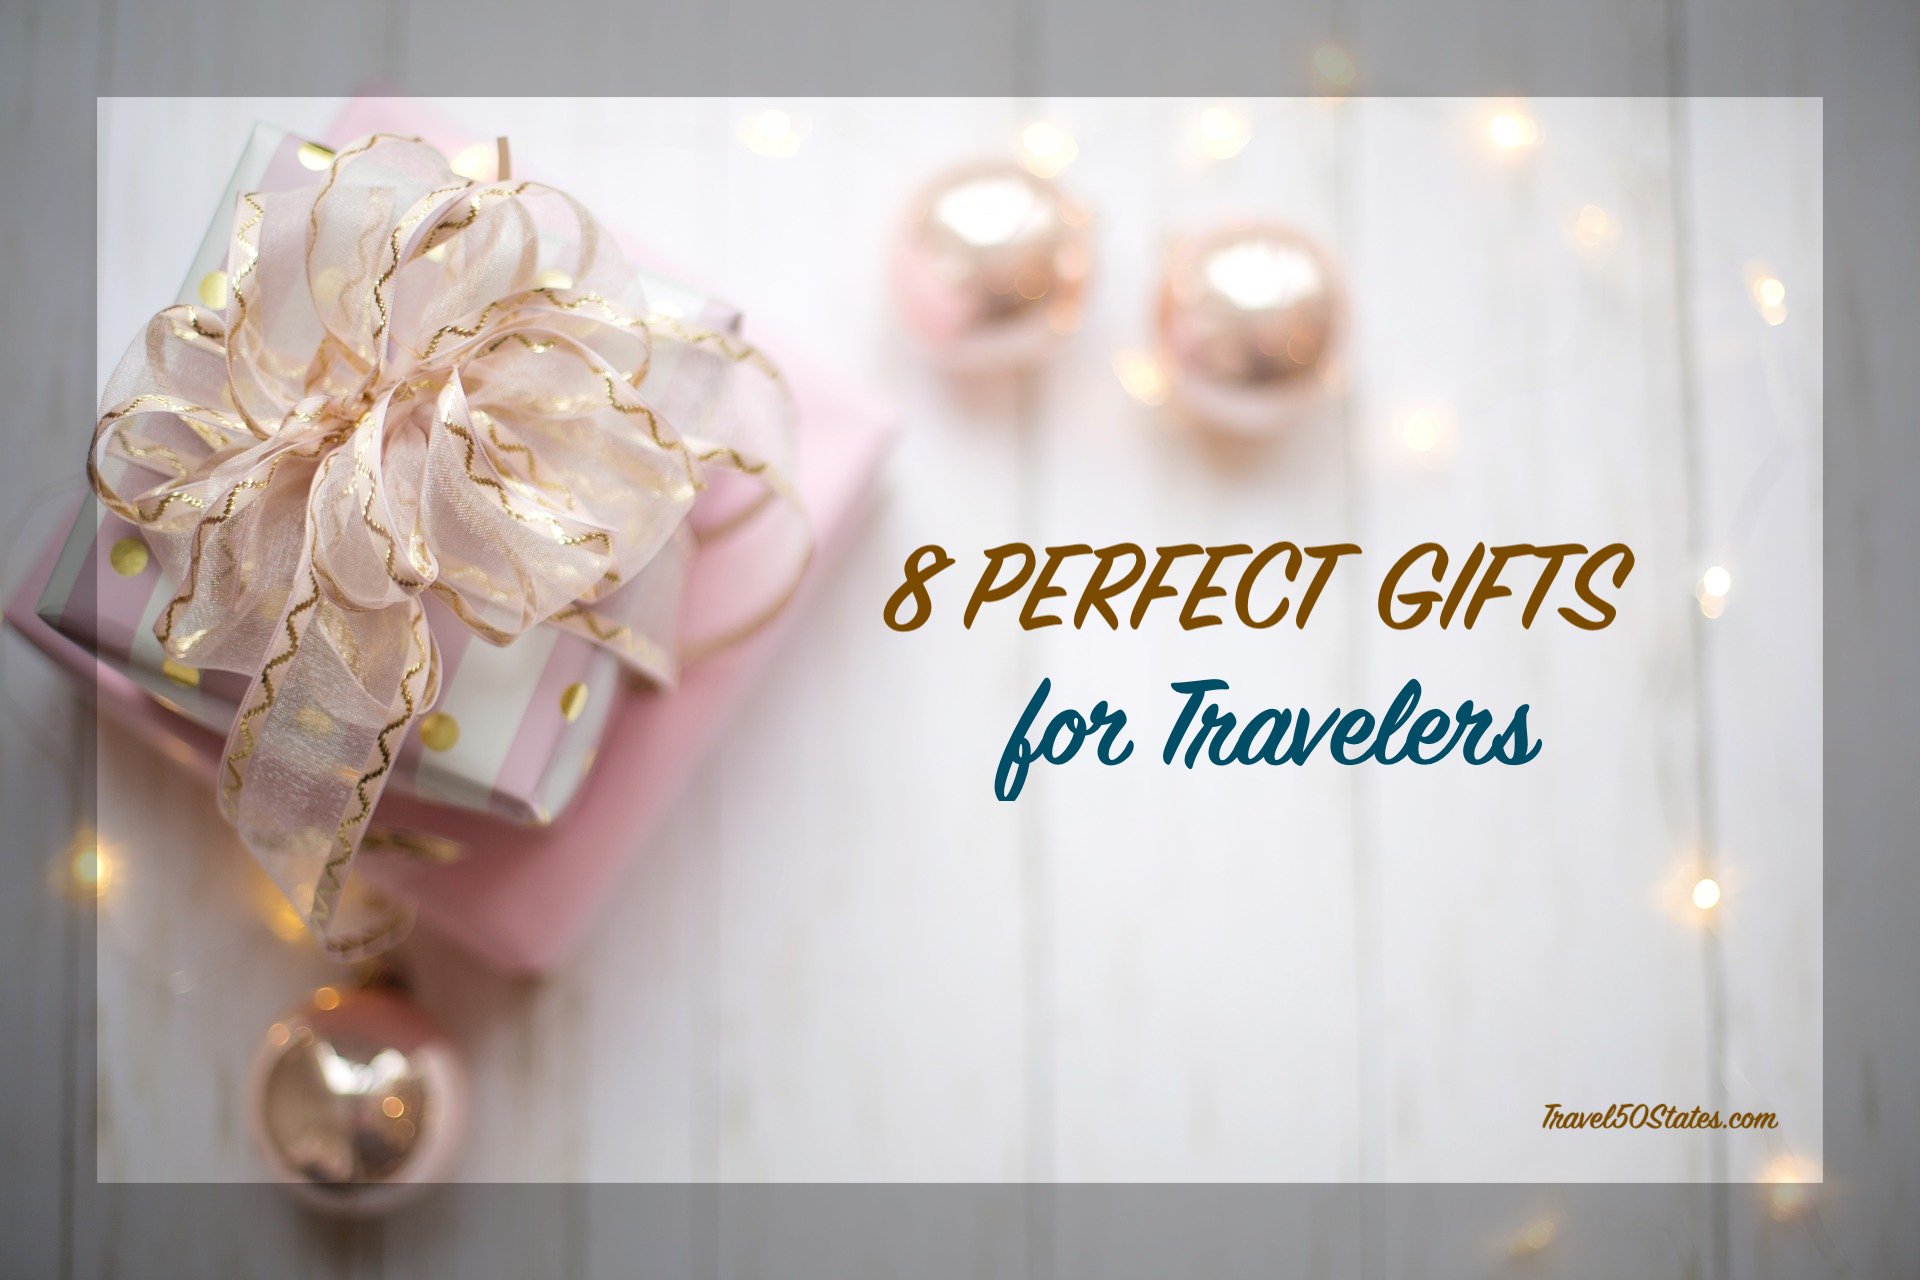 8 Perfect Gifts for Travelers